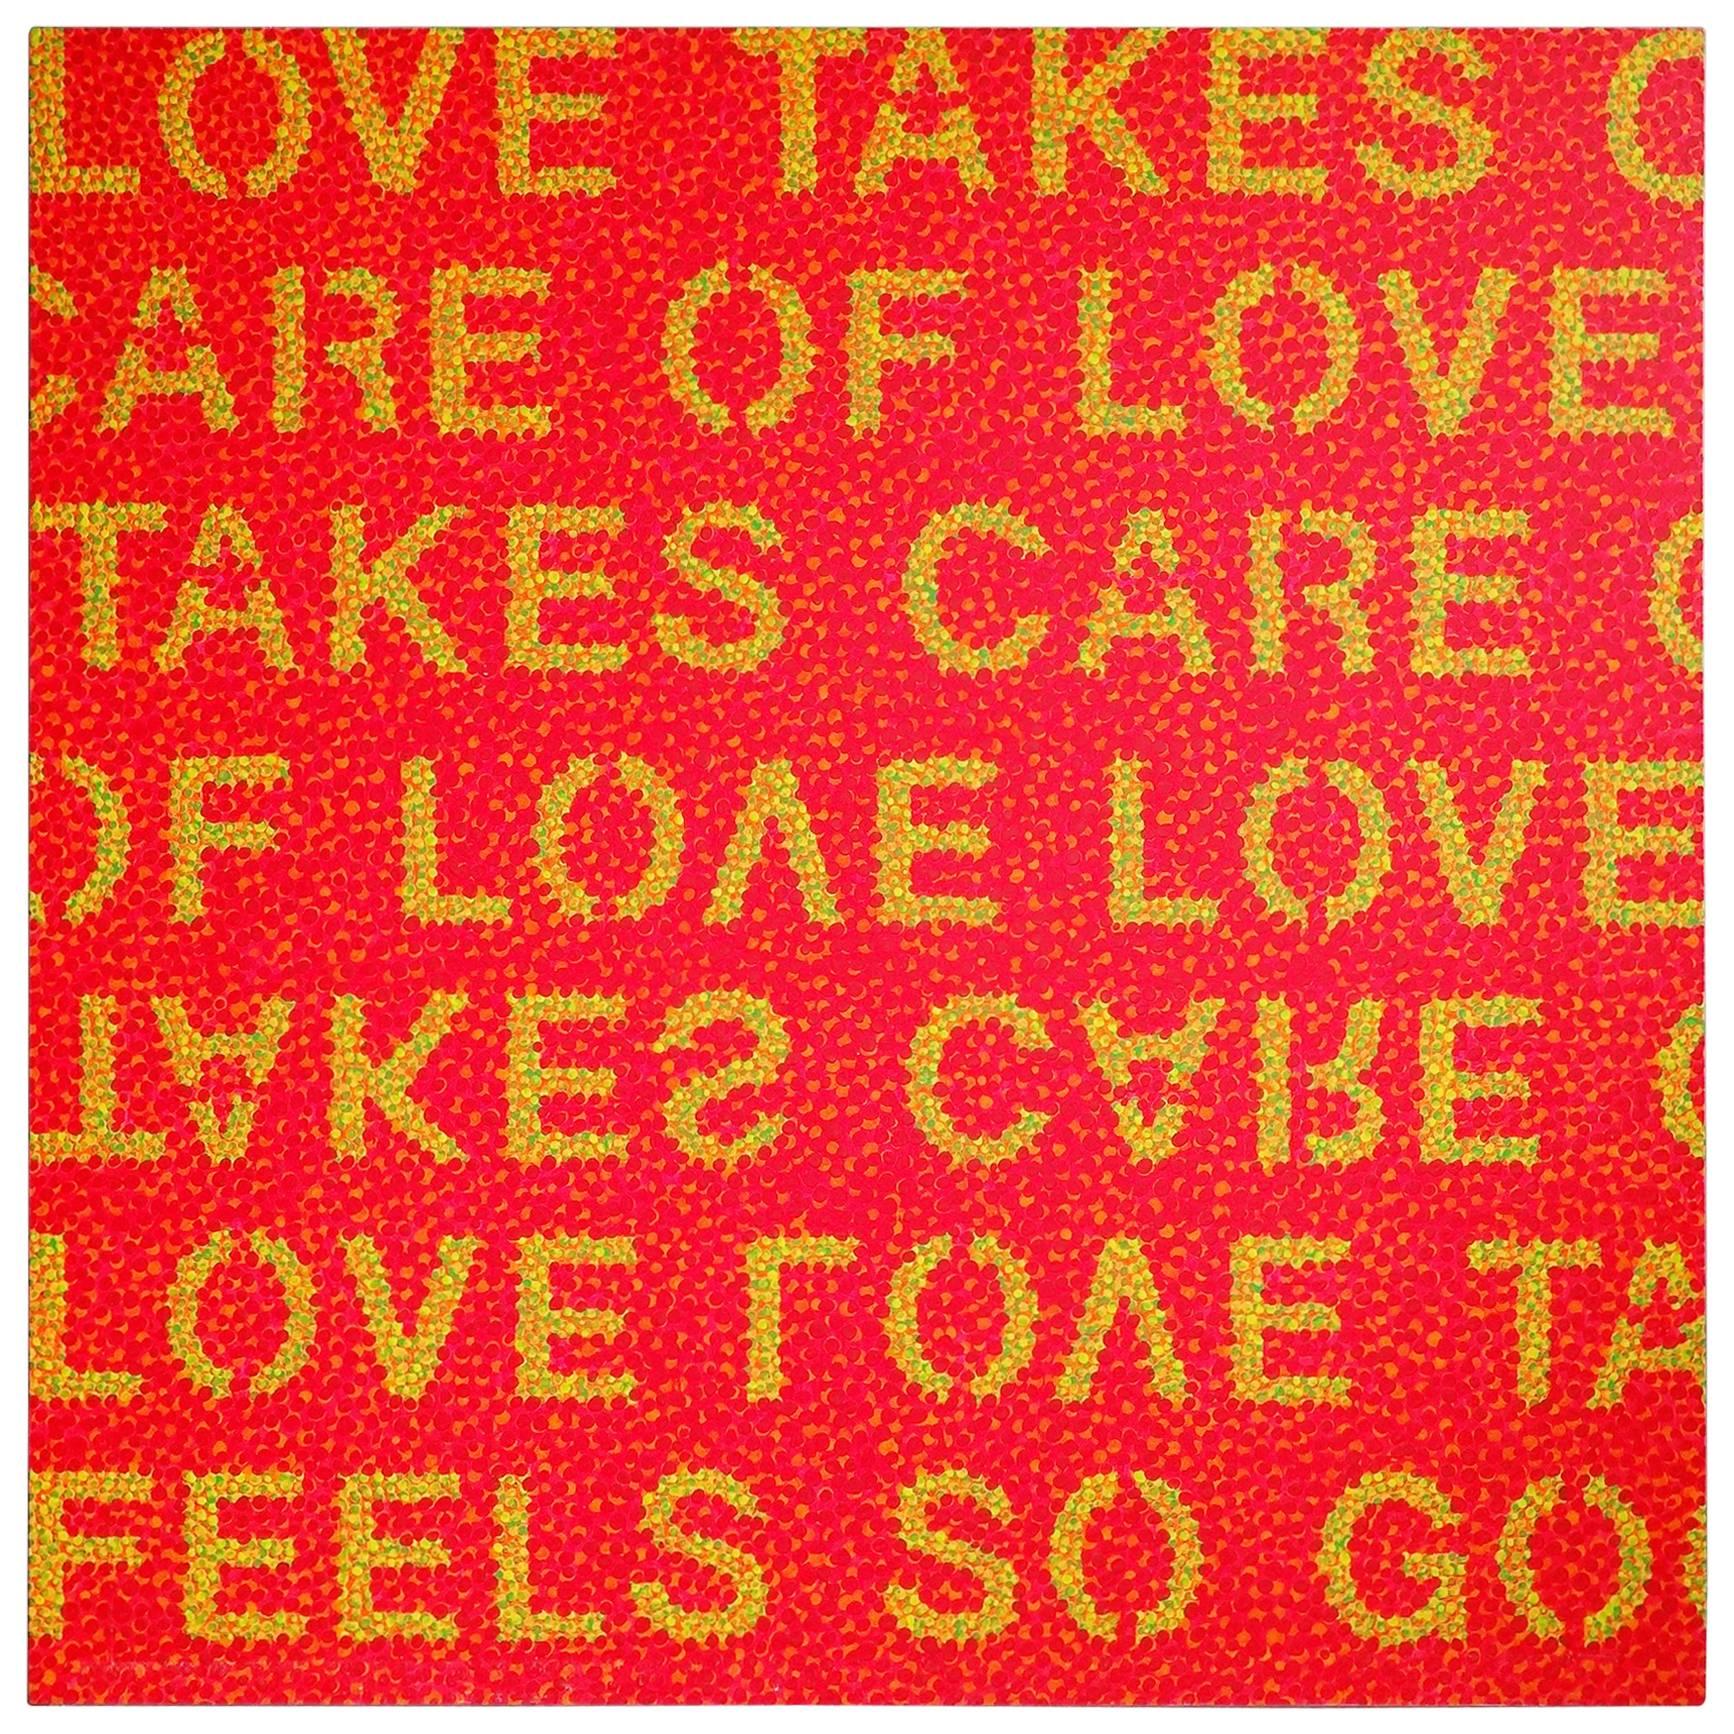 Acrylic Text Painting by David Holland, circa 2001 original; Modern Love For Sale